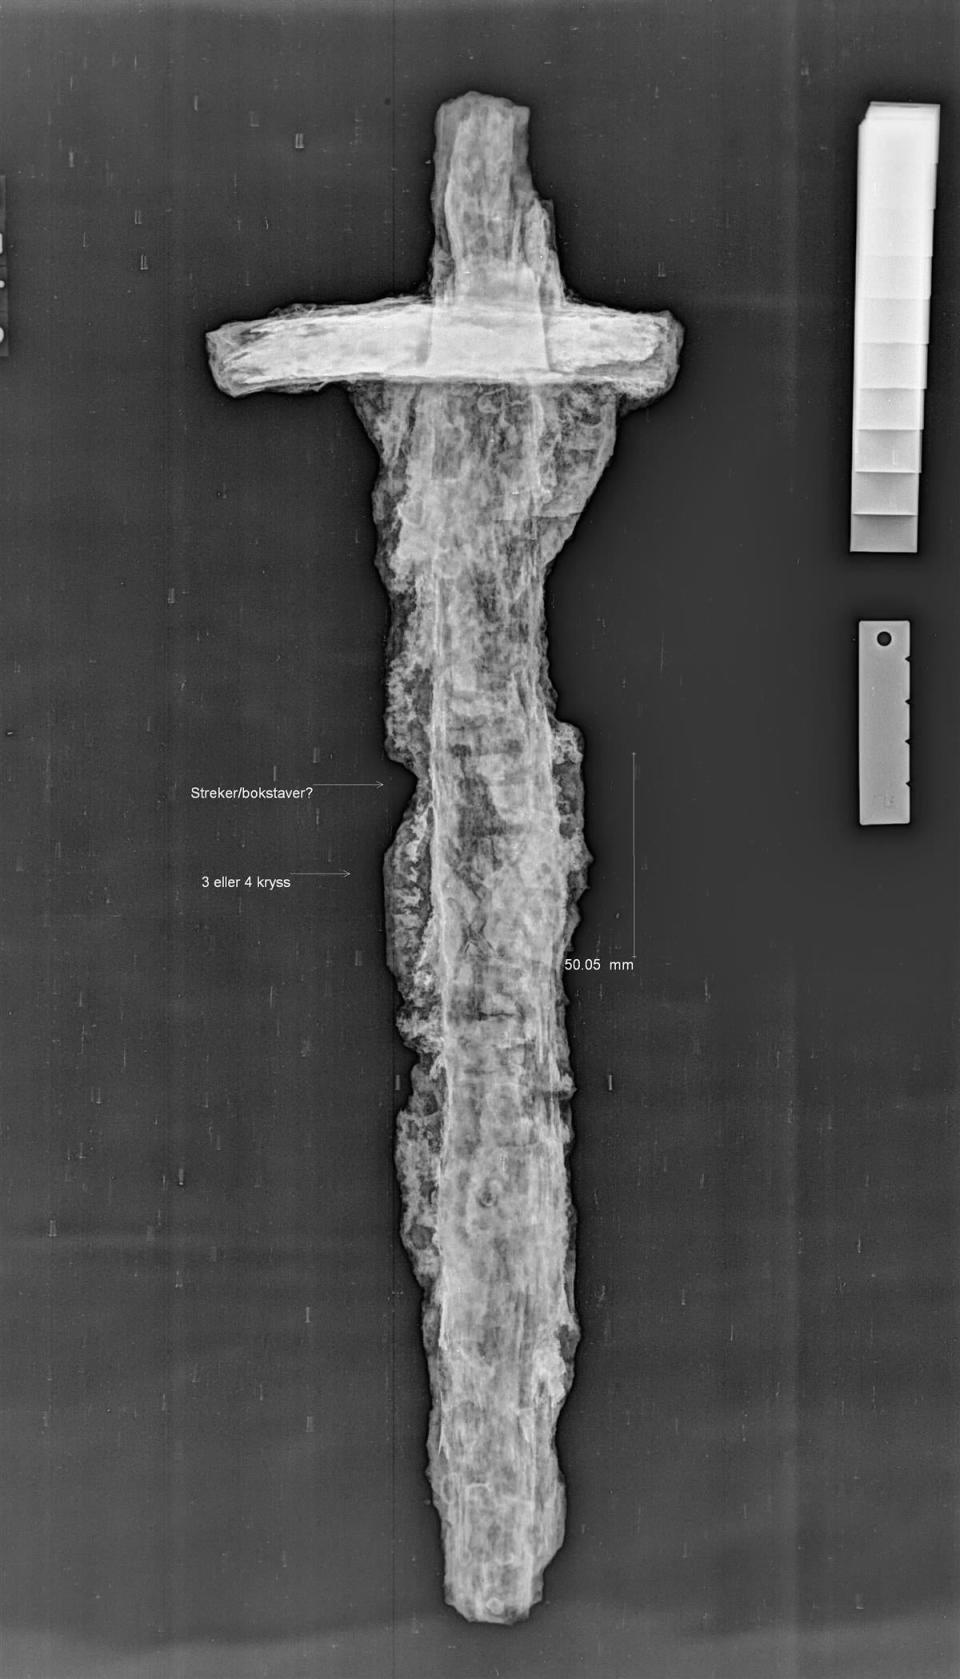 X-ray image of the sword found in Suldal (Archaeological Museum, University of Stavanger)